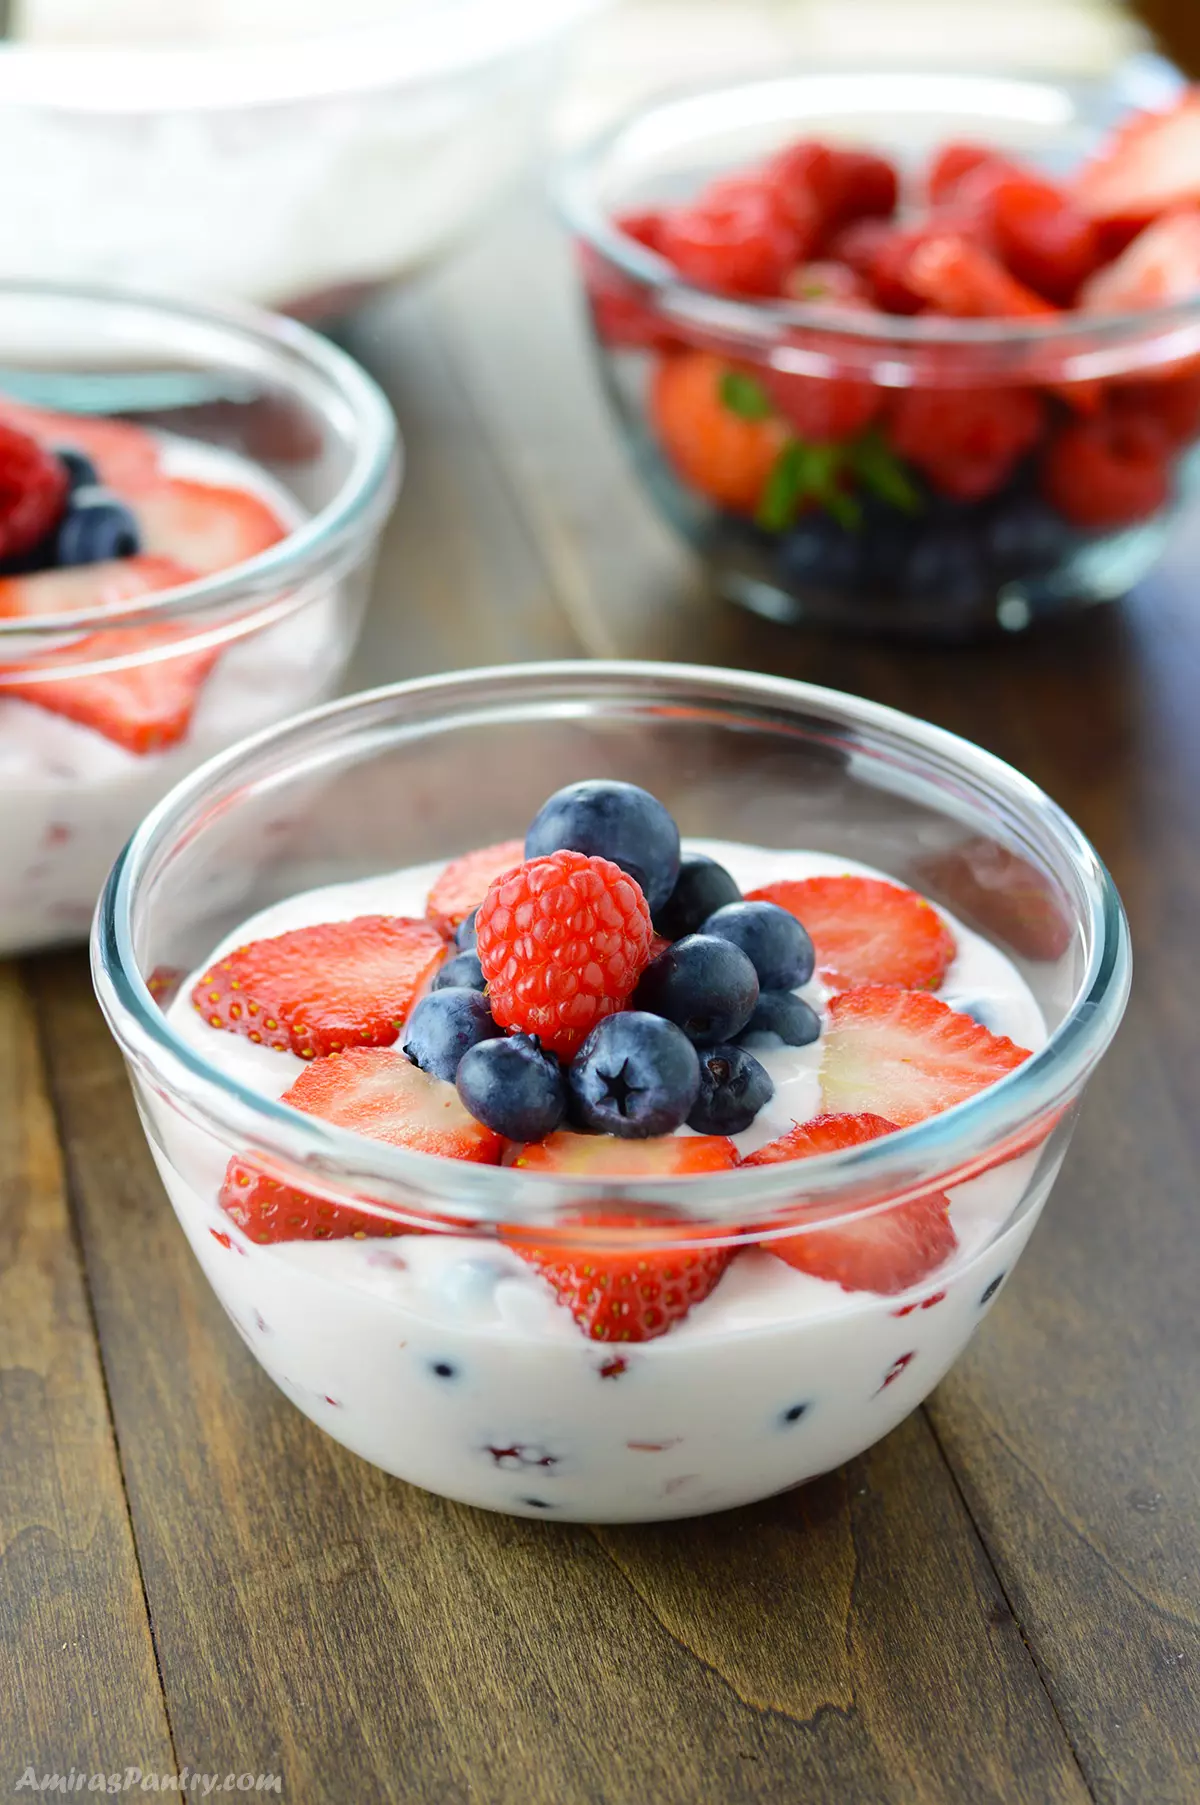 A close up look at a bowl of creamy fruit salad on a wooden surface.